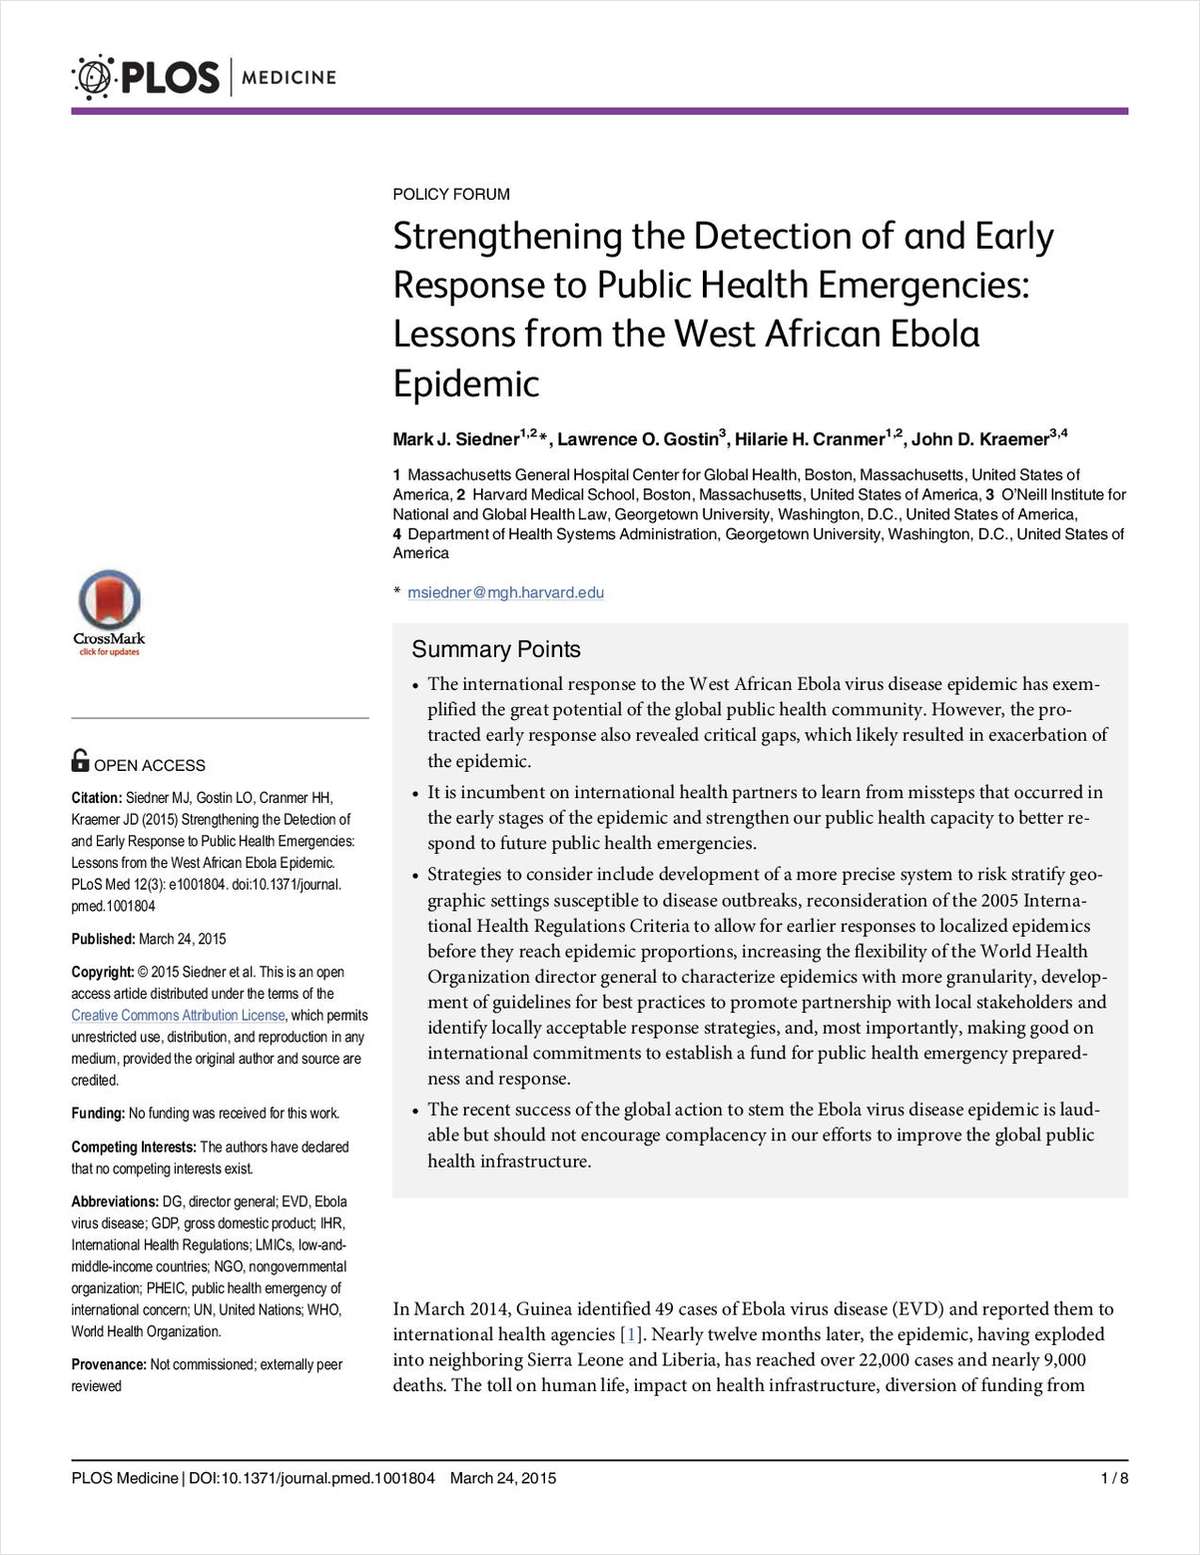 Strengthening the Detection of and Early Response to Public Health Emergencies